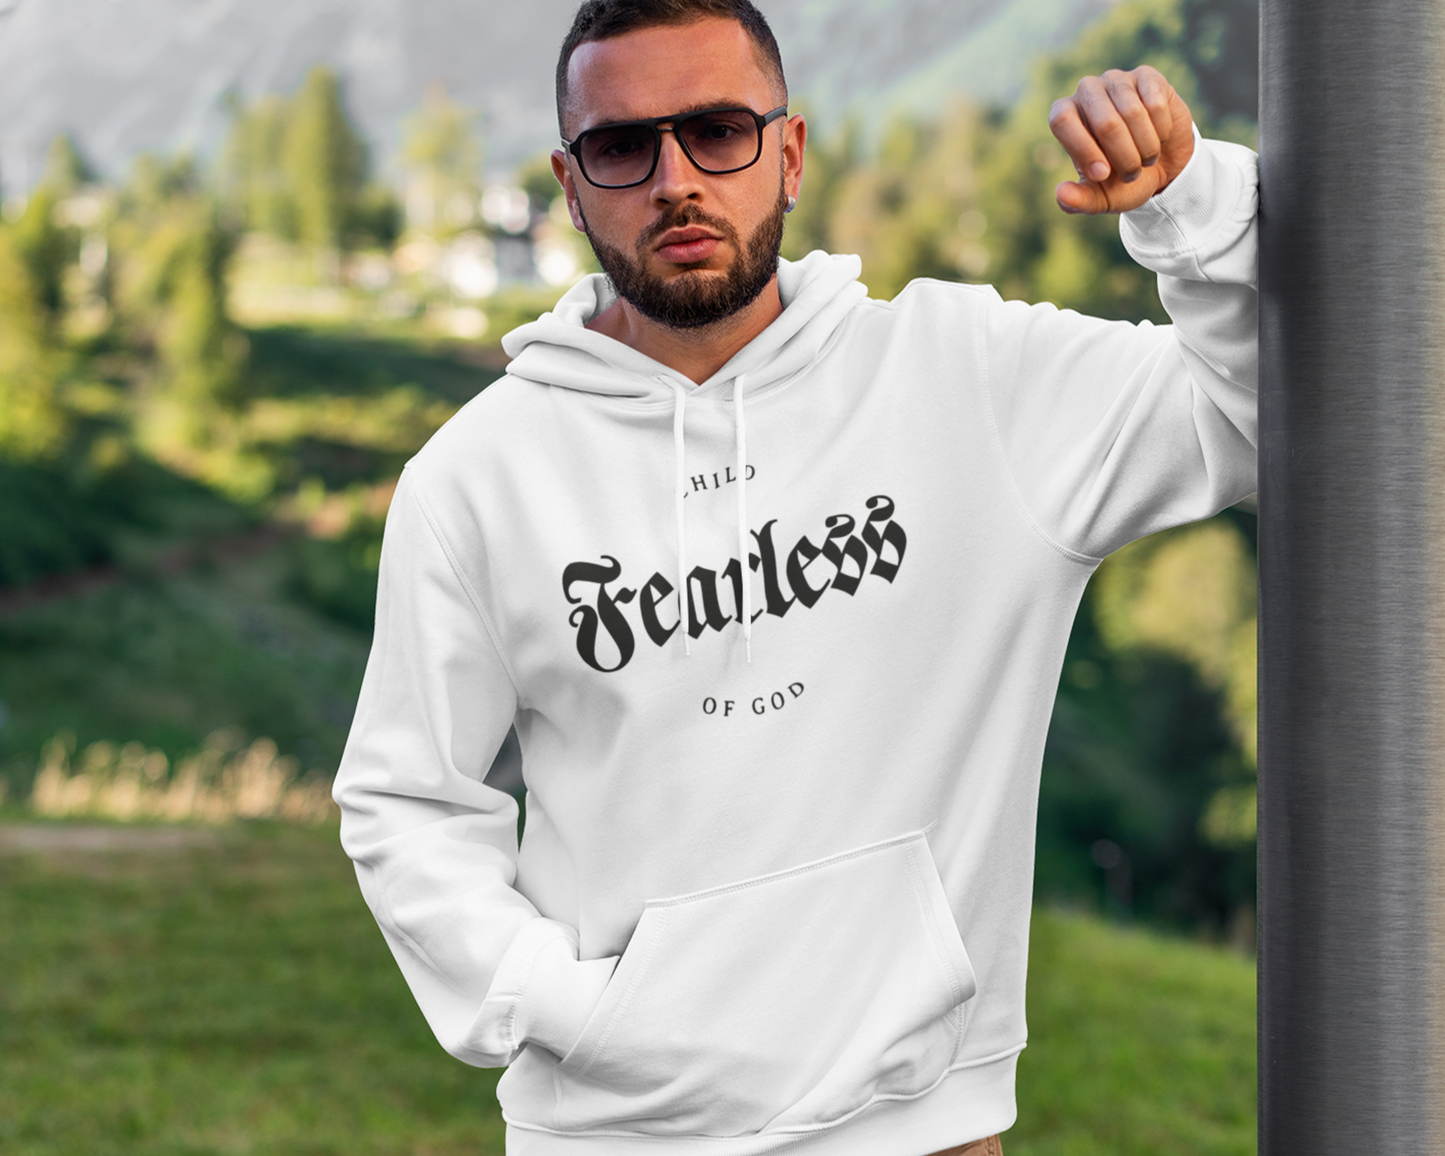 Fearless child of God Mens Hoodie